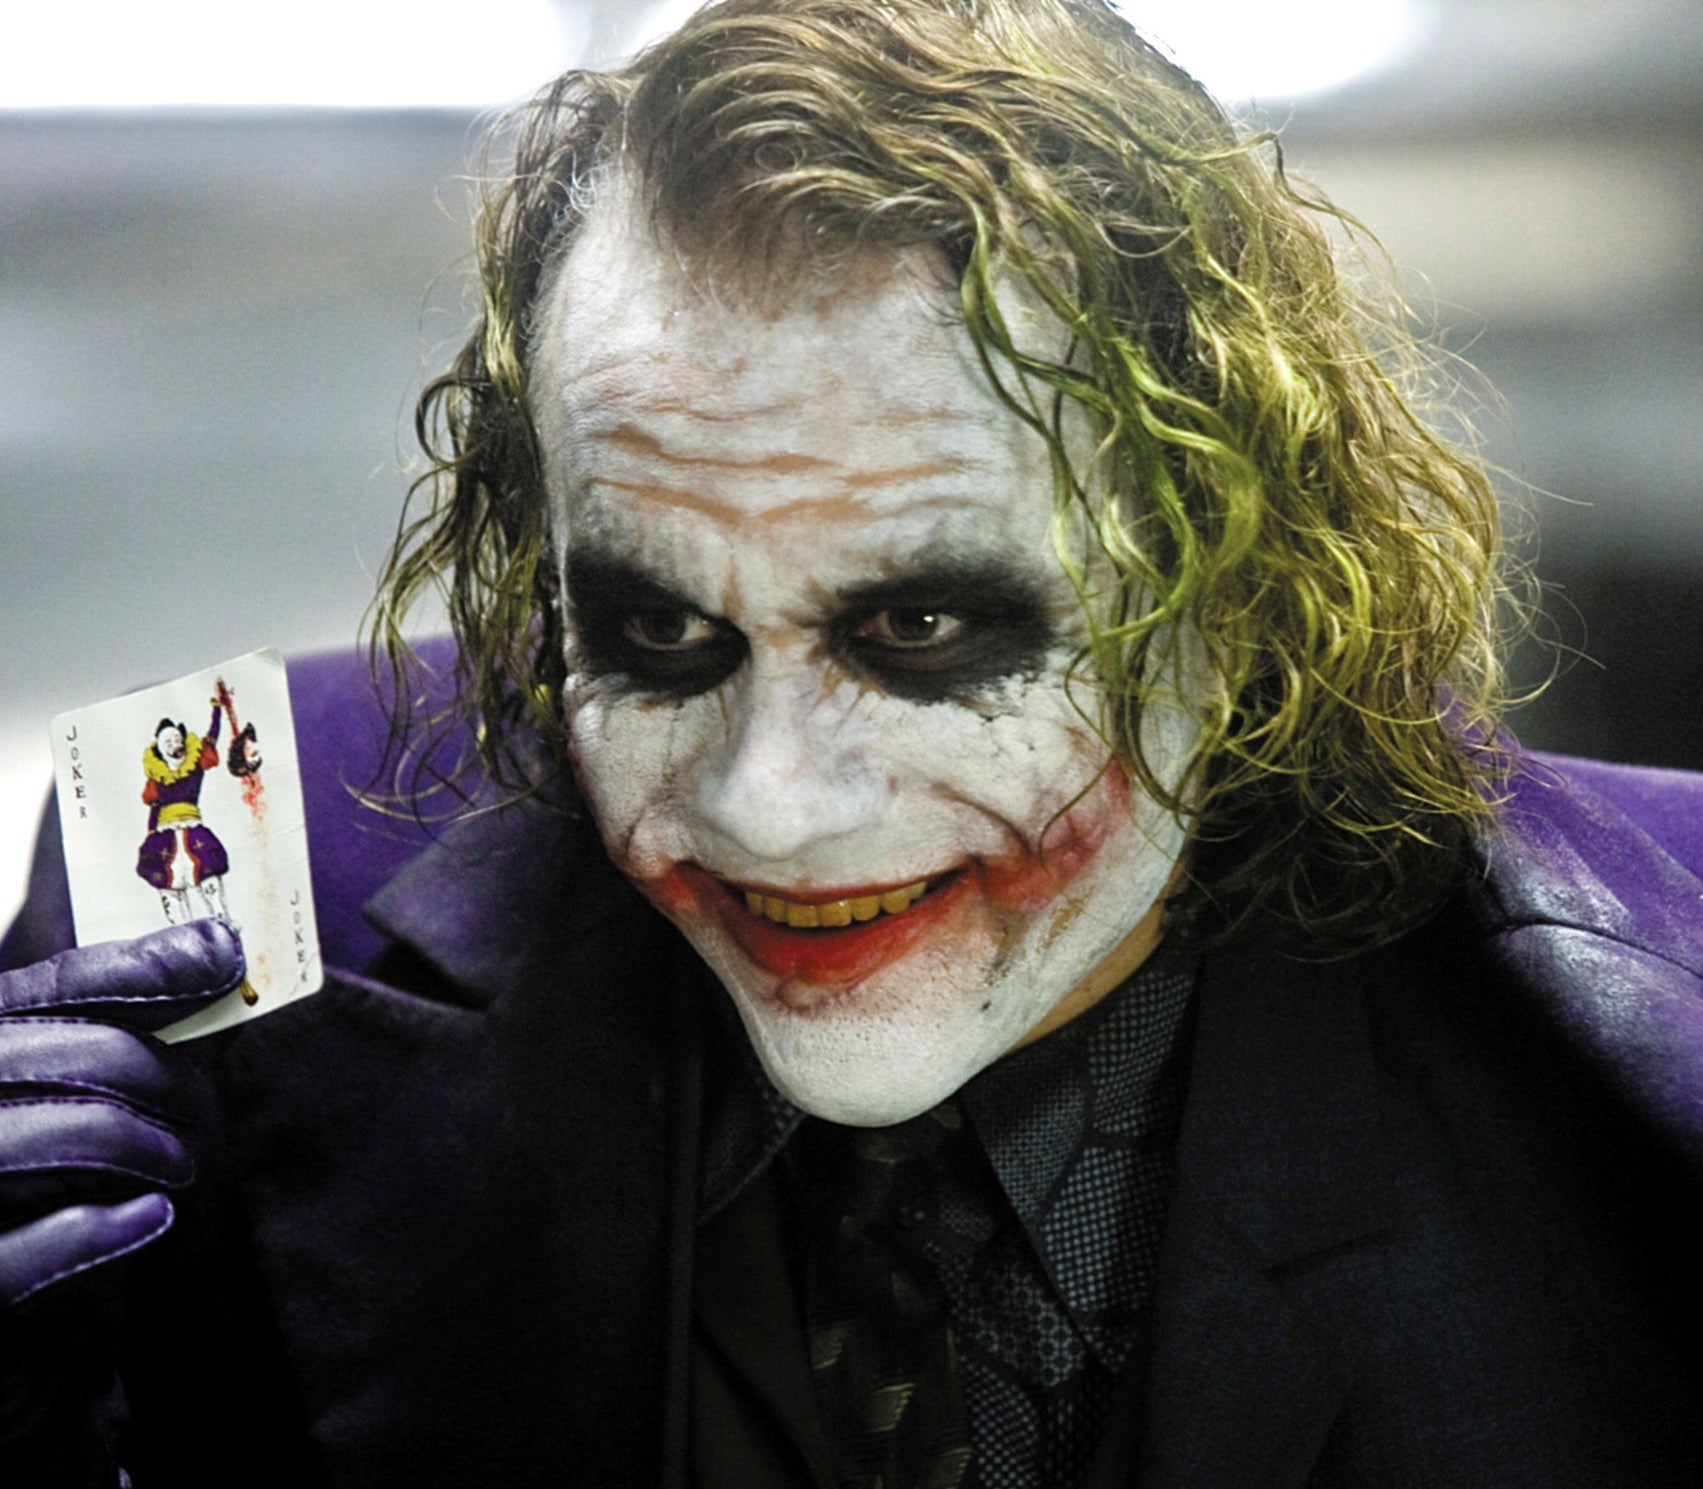 The Joker with smeared makeup holding up a playing card of a joker